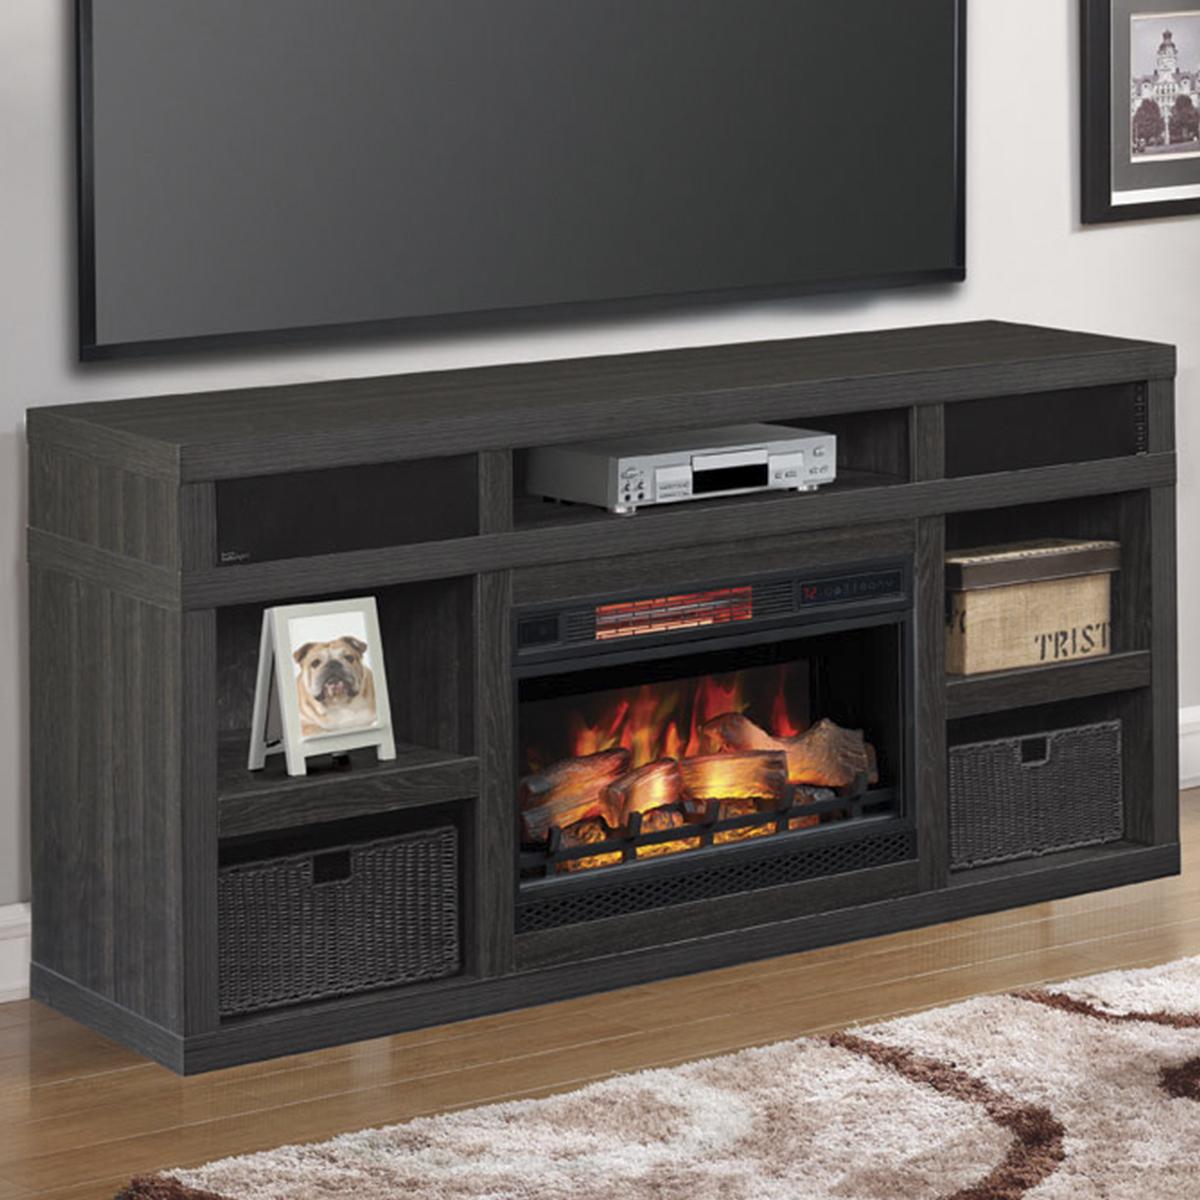 Fireplace Tv Stand for 70 Inch Tv New Fabio Flames Greatlin 64" Tv Stand In Black Walnut